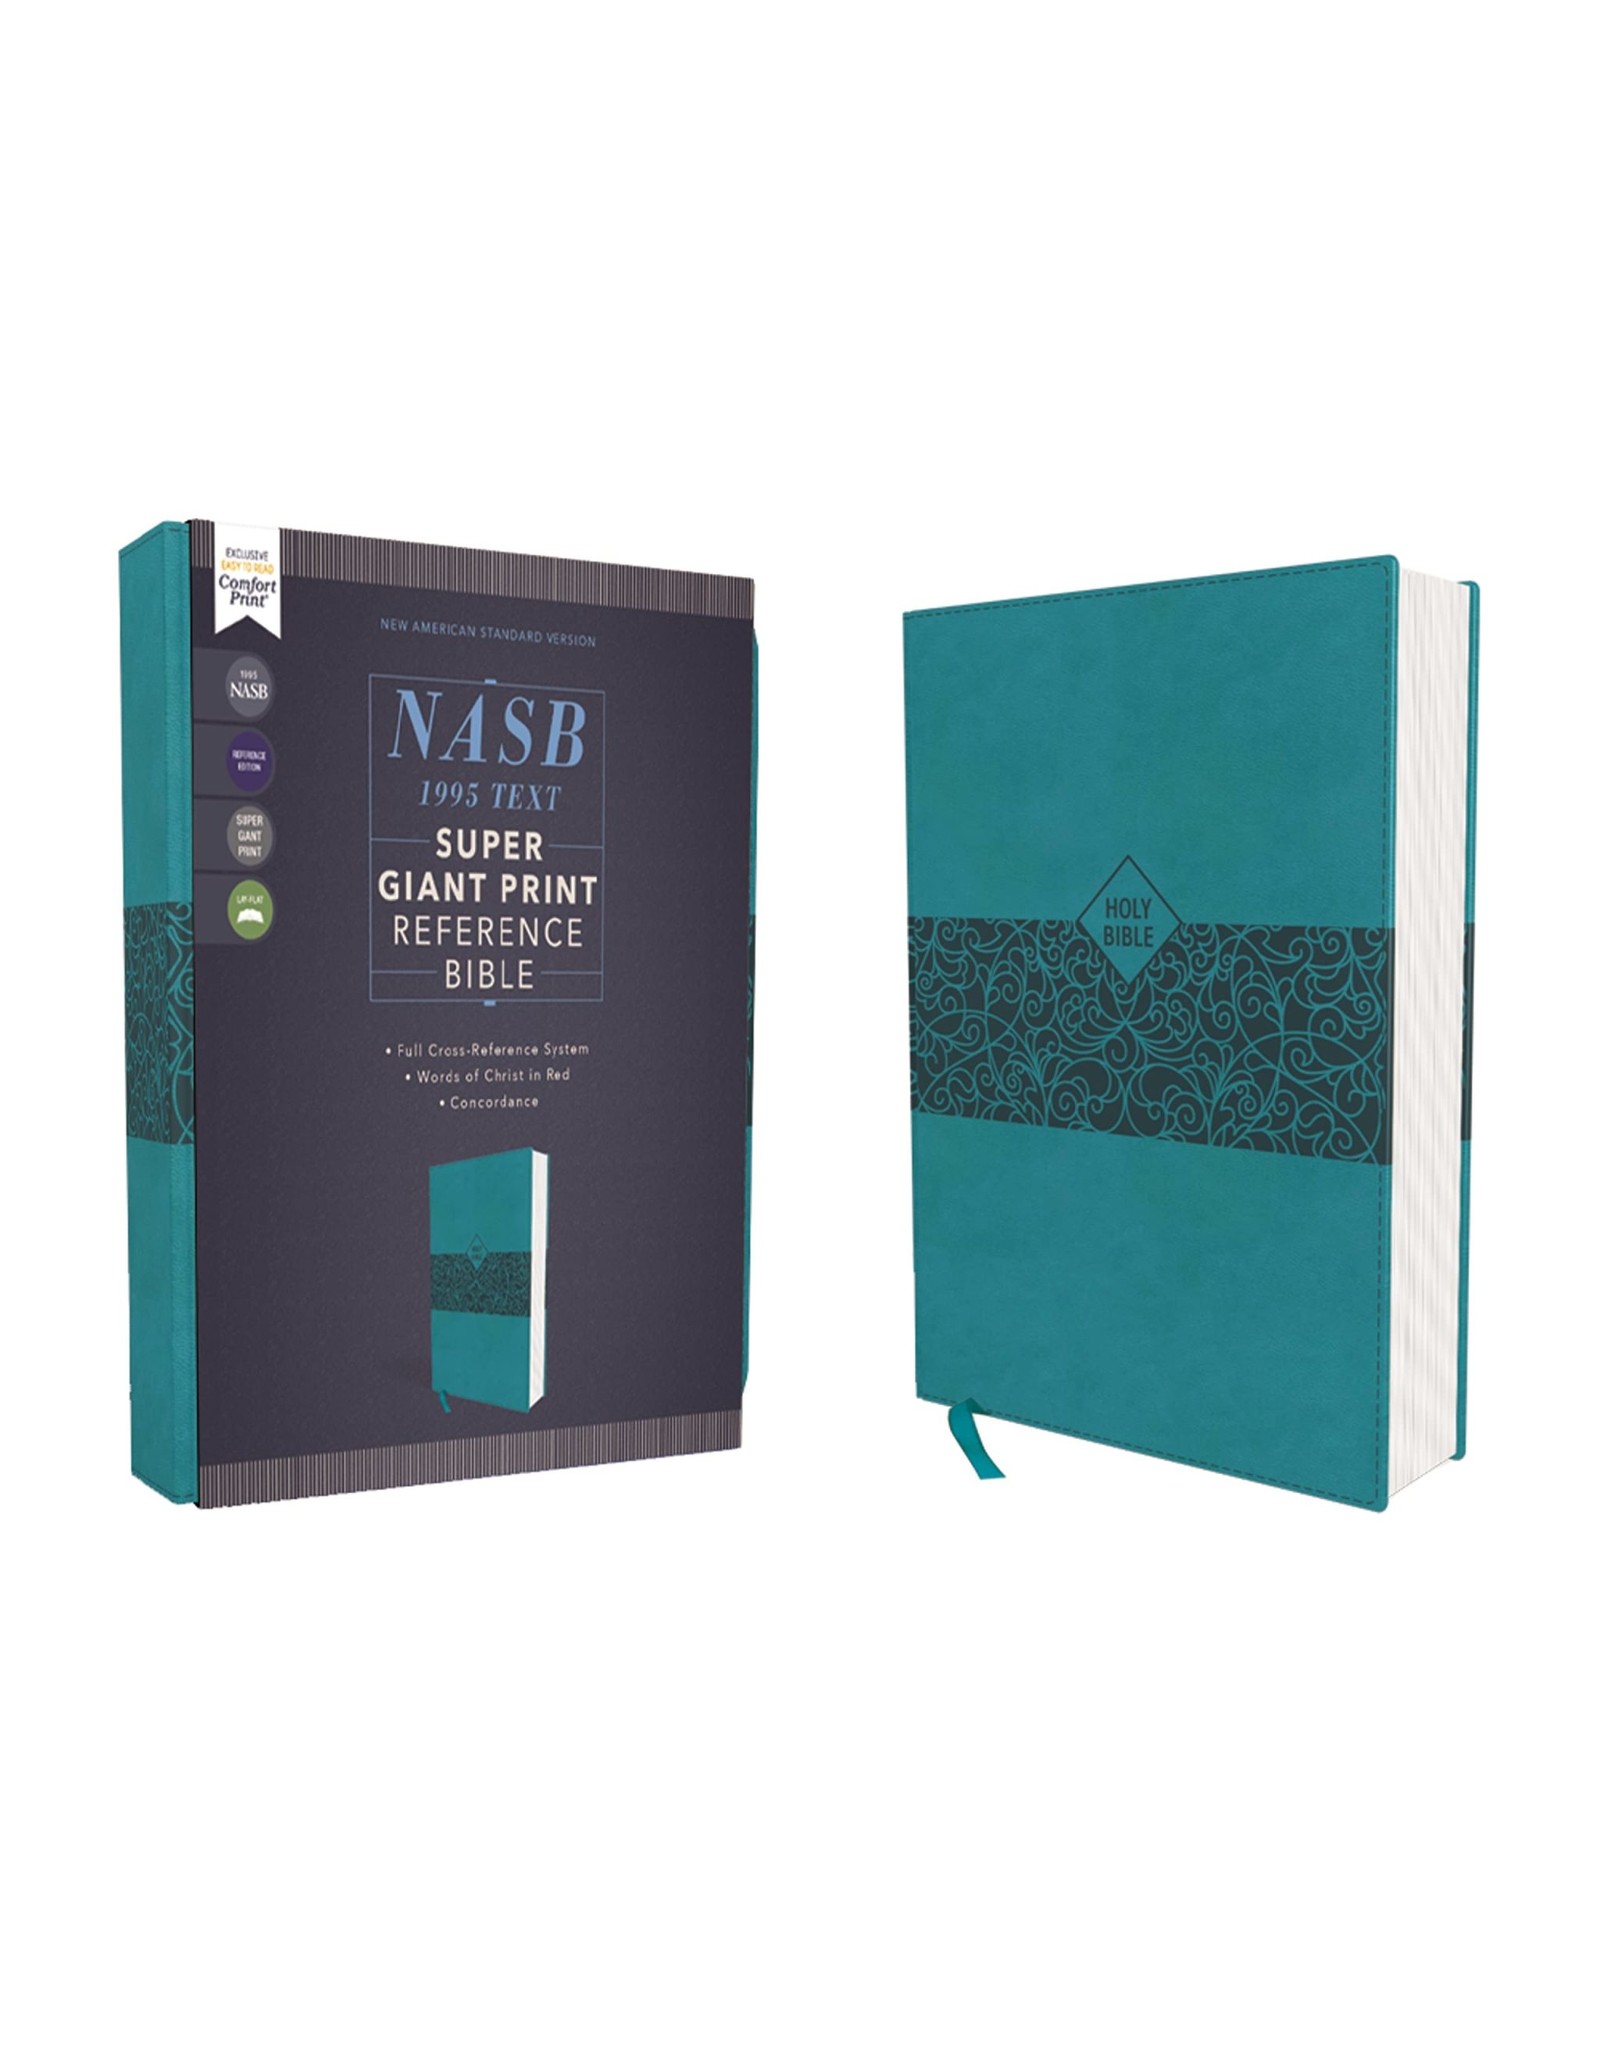 Harper Collins / Thomas Nelson / Zondervan NASB, Super Giant Print Reference Bible, Leathersoft, Teal, Red Letter, 1995 Text, Comfort Print